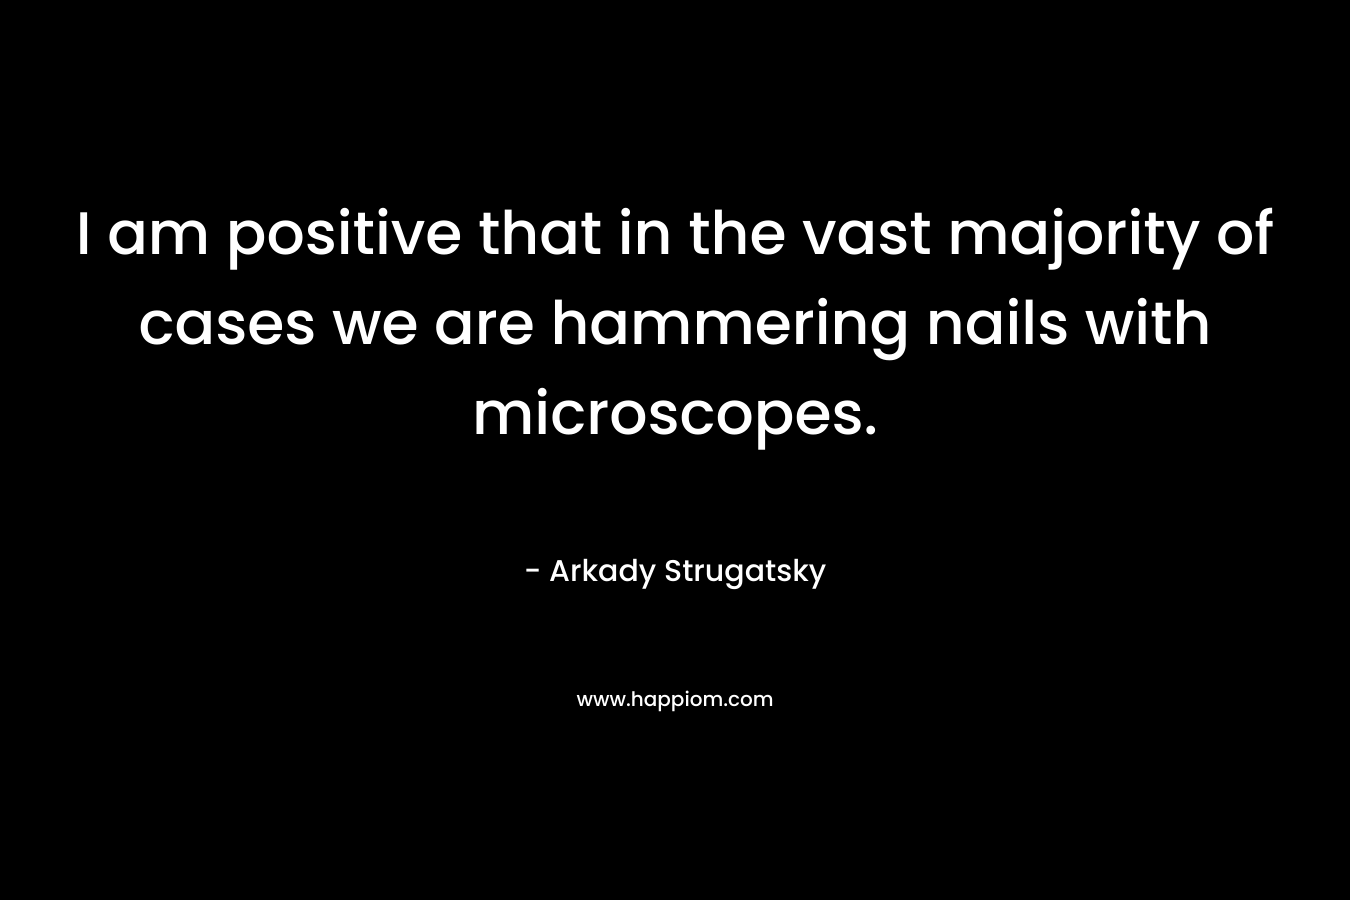 I am positive that in the vast majority of cases we are hammering nails with microscopes.